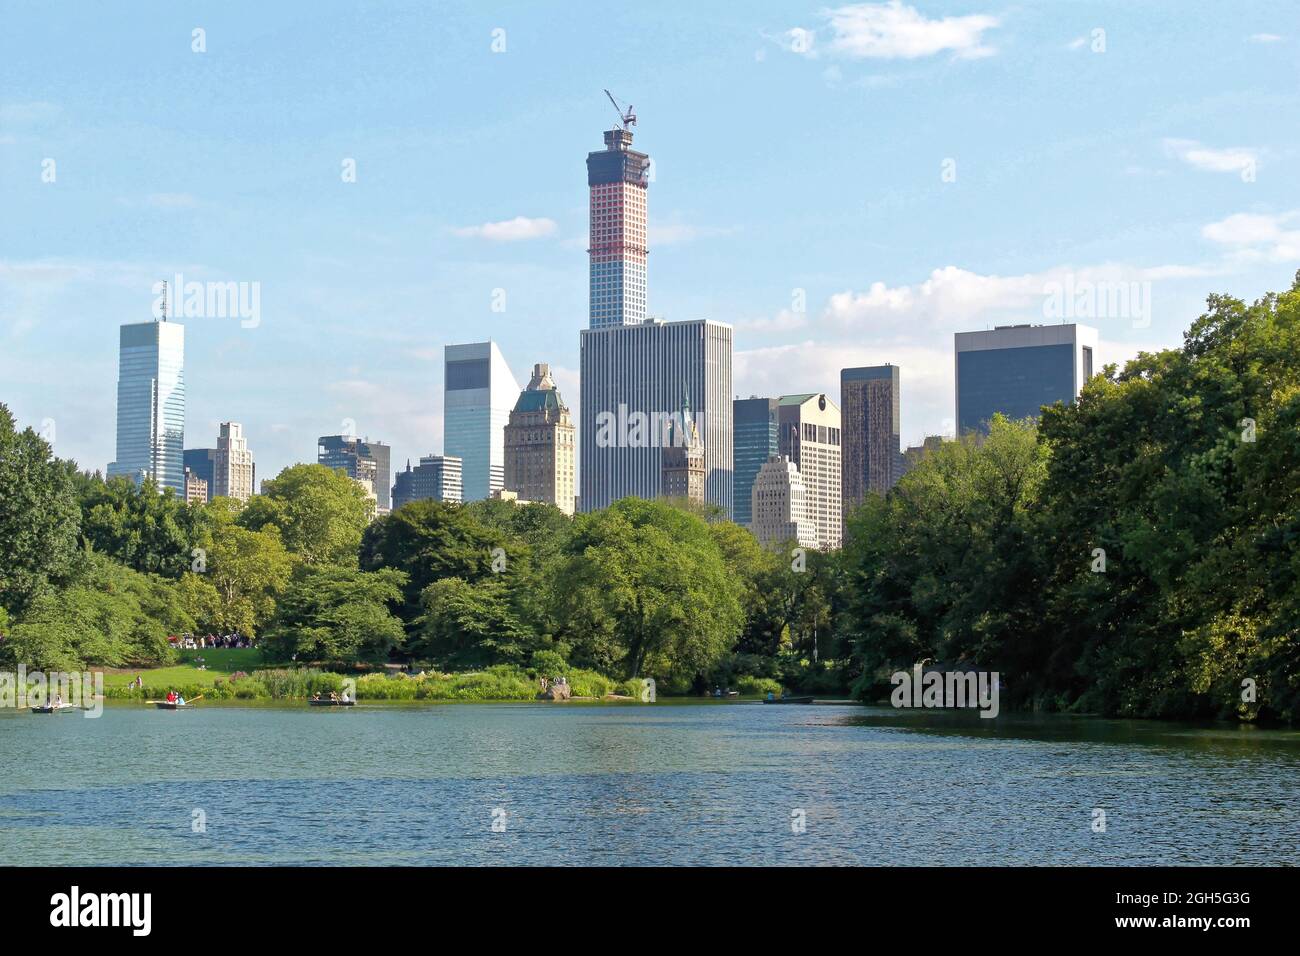 NEW YORK, USA - August 5, 2014: Pond in the central park in NYC. Central Park and Manhattan Skyline. Midtown Manhattan skyline viewed from Central Par Stock Photo